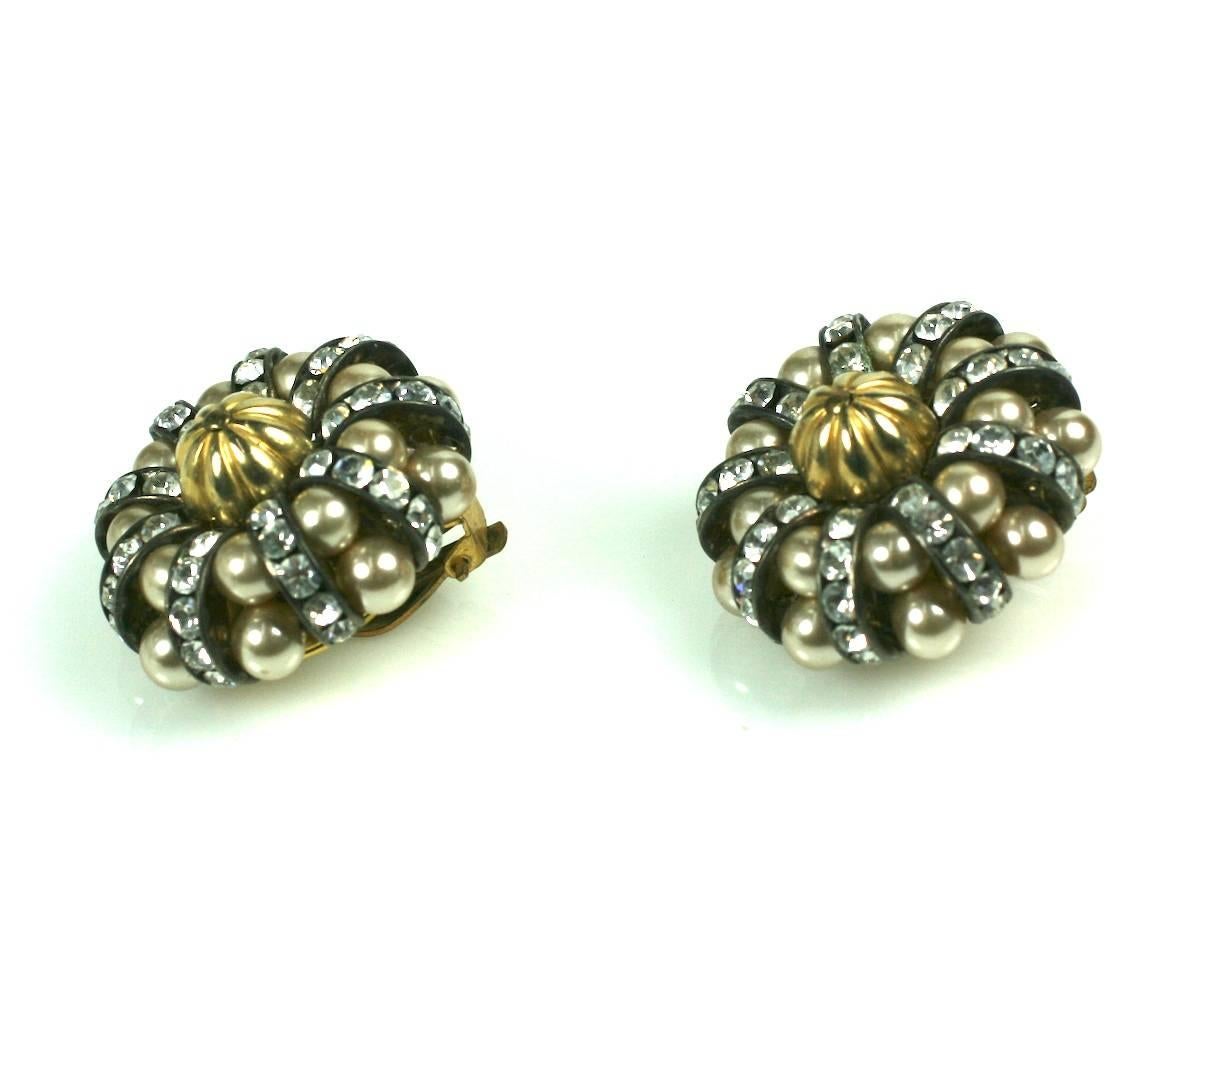 Attractive French Pearl and Pave Rondel Cluster Earrings from the 1950's. Layers of beige faux pearls alternate with pave rondels in silvered settings against a central fluted gold metal cabochon. Clip back fittings. 1950's France. Excellent